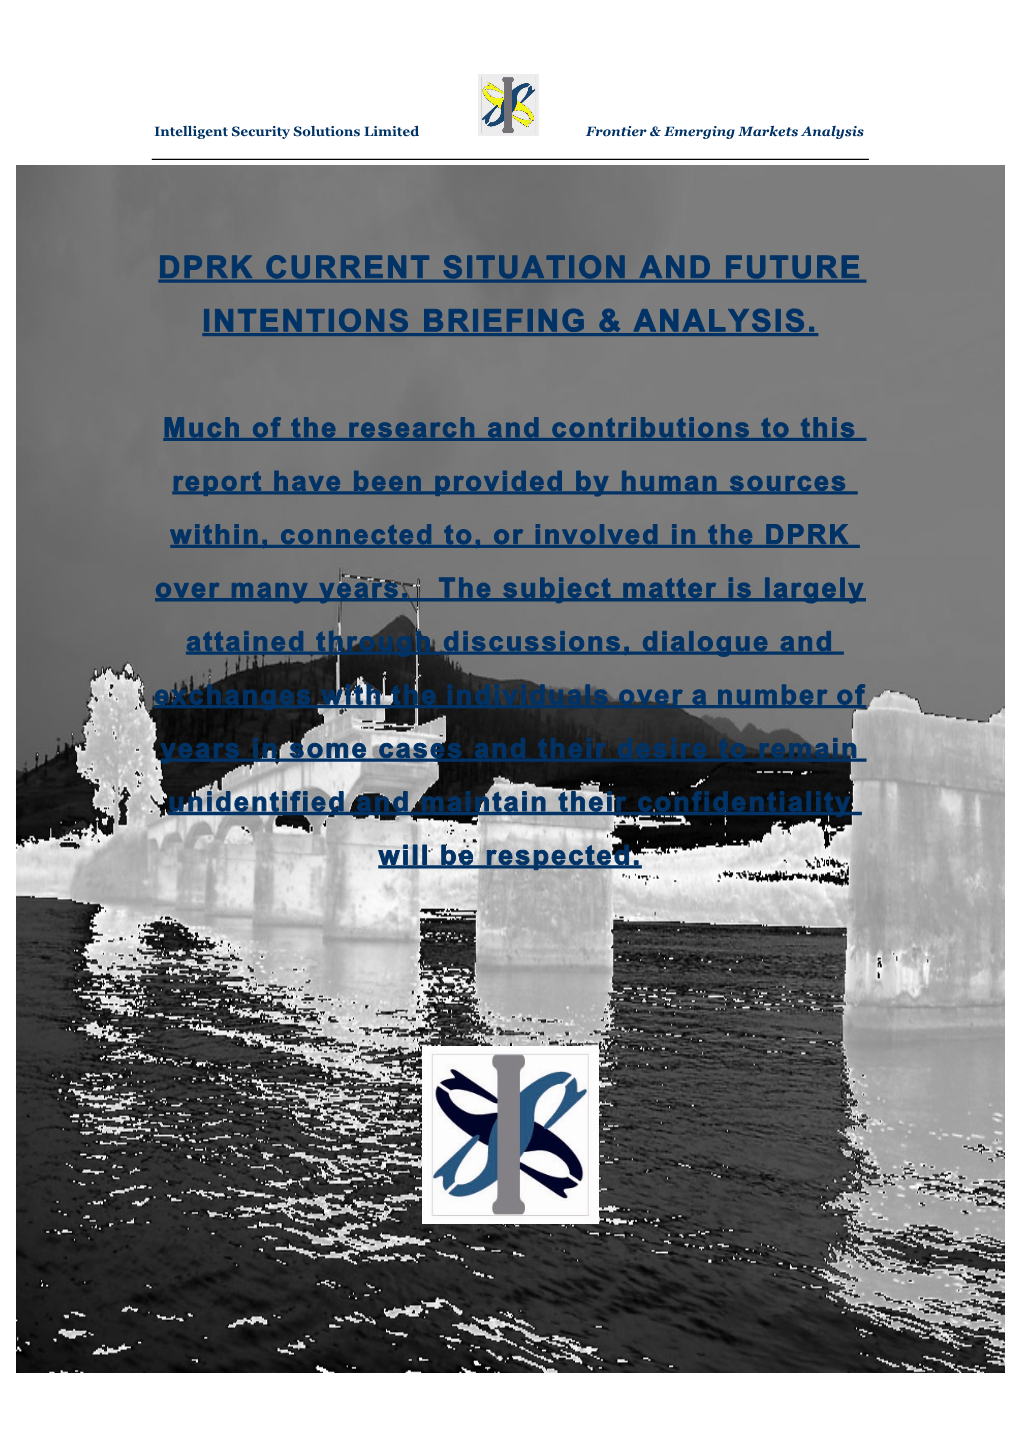 Dprk Current Situation and Future Intentions Briefing & Analysis